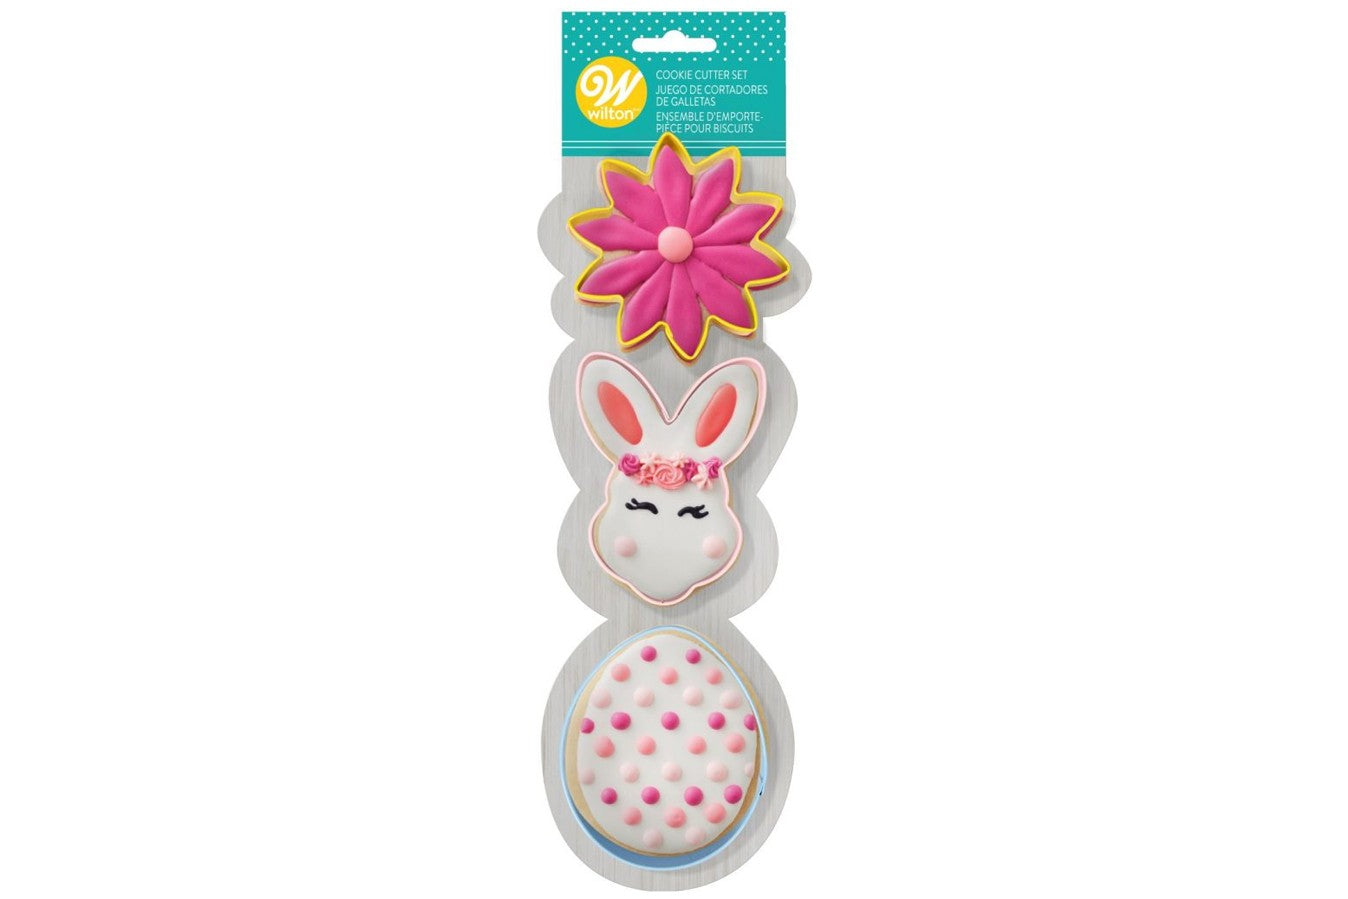 Wilton Cookie Cutter Easter Set - Bunny, Egg & Flower - The Cooks Cupboard Ltd